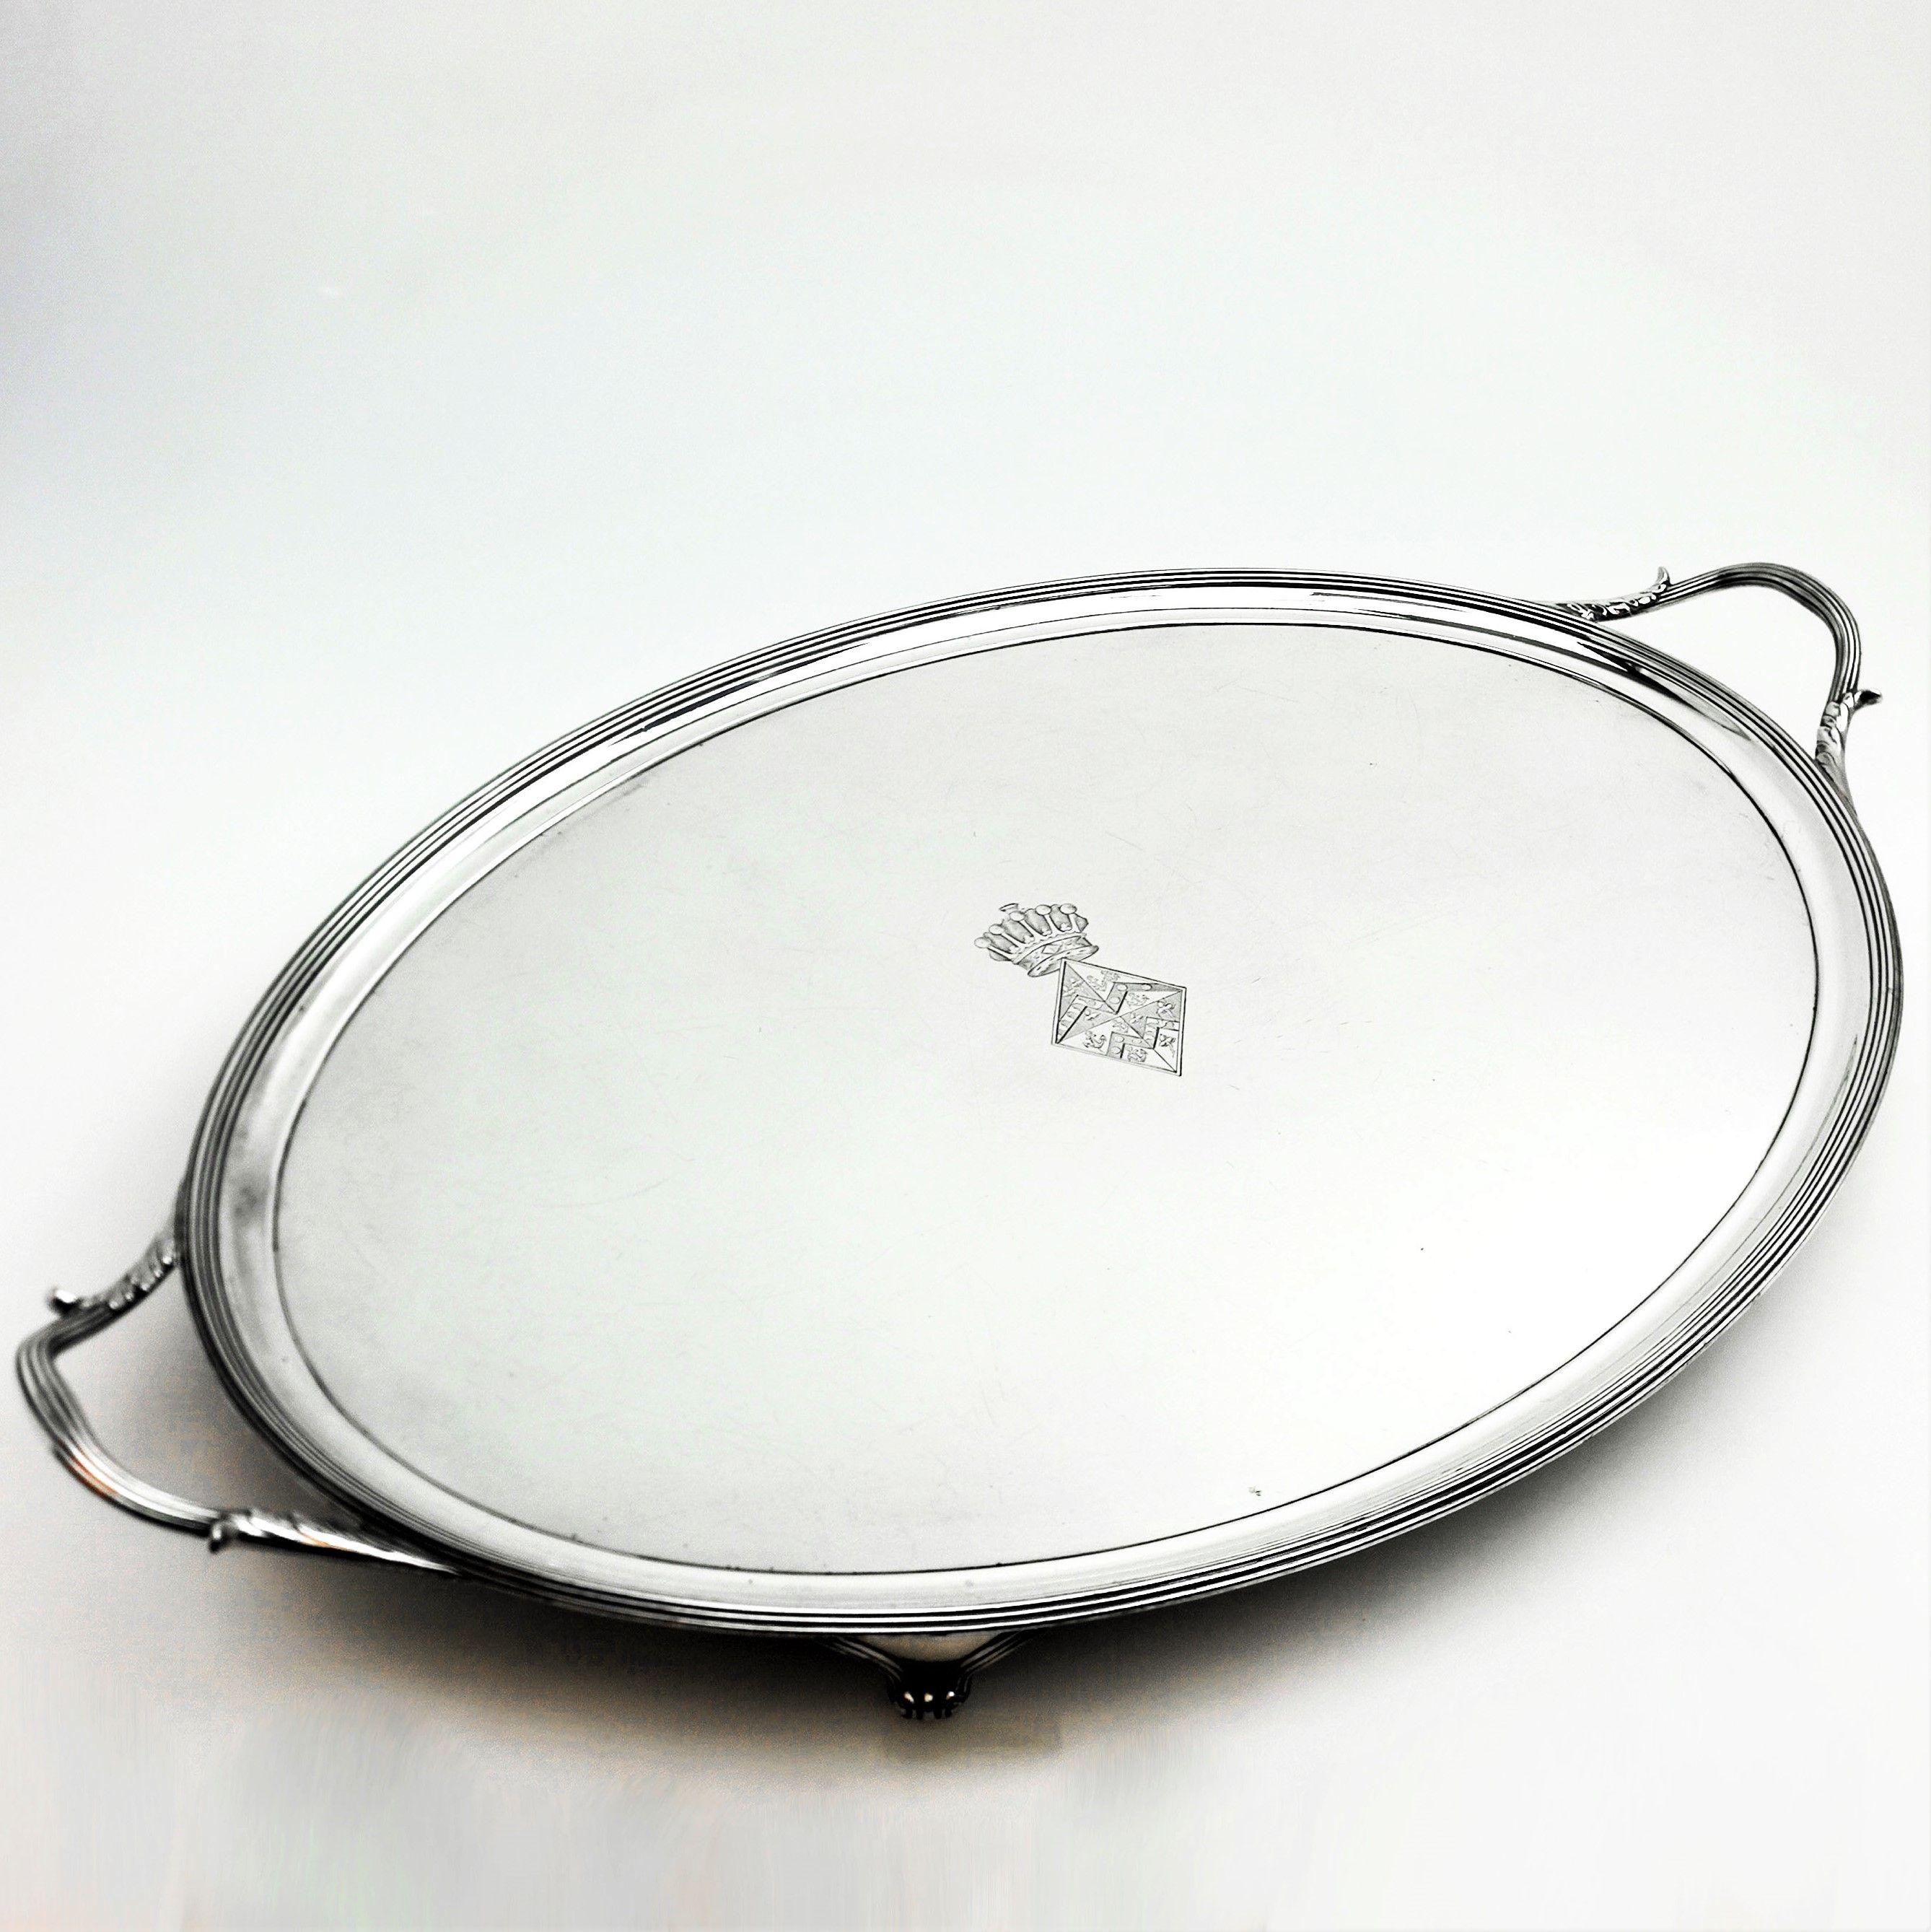 A magnificent antique George III large solid silver tray with an oval form and two handles. The tray has a crest engraved in the middle.
 
Made in London in 1800 by Hannam & Crouch.
 
Approx. Weight 115.5oz / 3594g
Measures: Approx. length